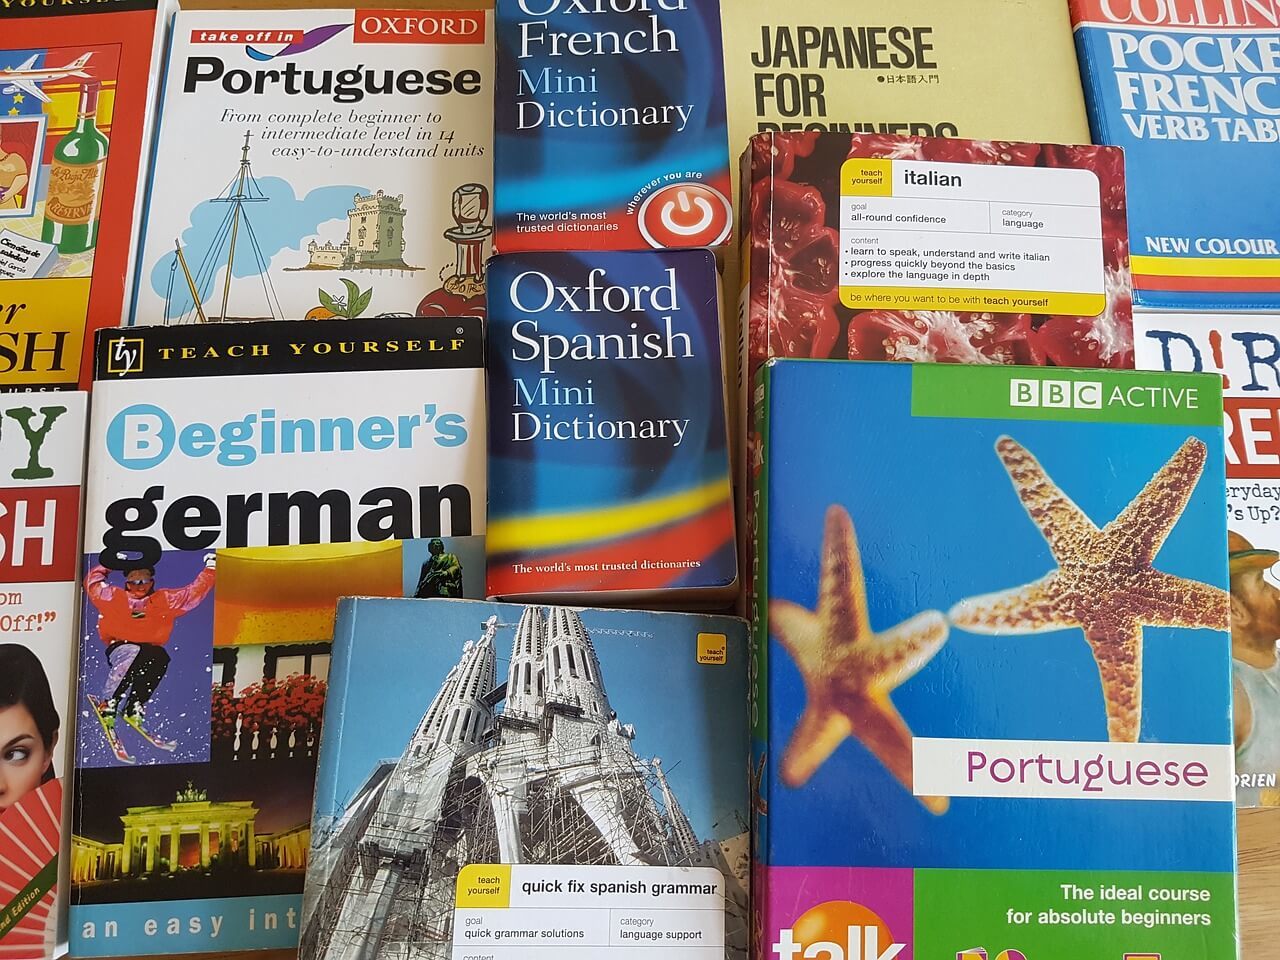 Books are awesome but not necessarily the best language learning technique for a traveller